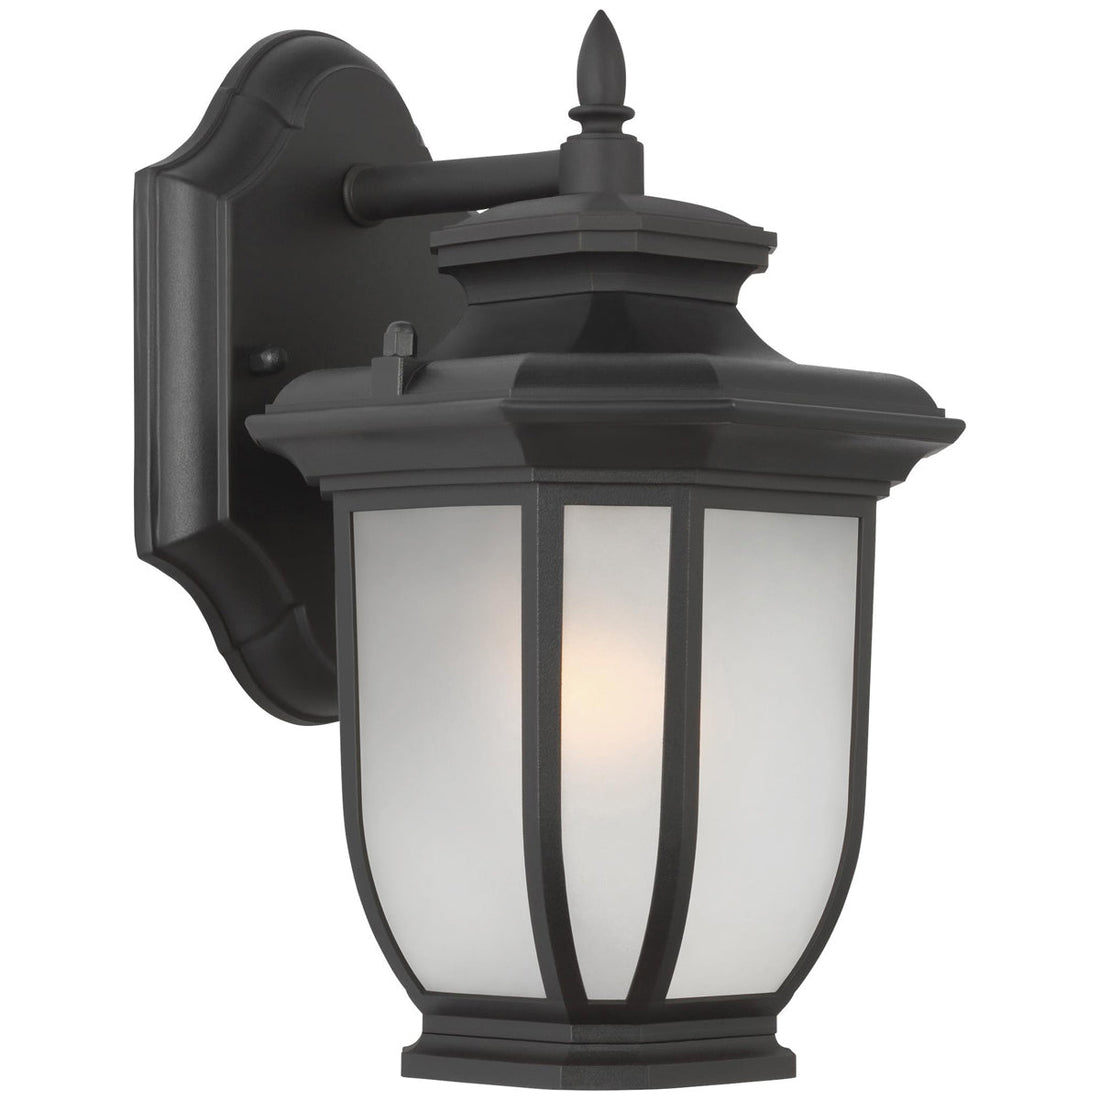 Sea Gull Lighting Childress 1-Light Outdoor Wall Lantern without Bulb